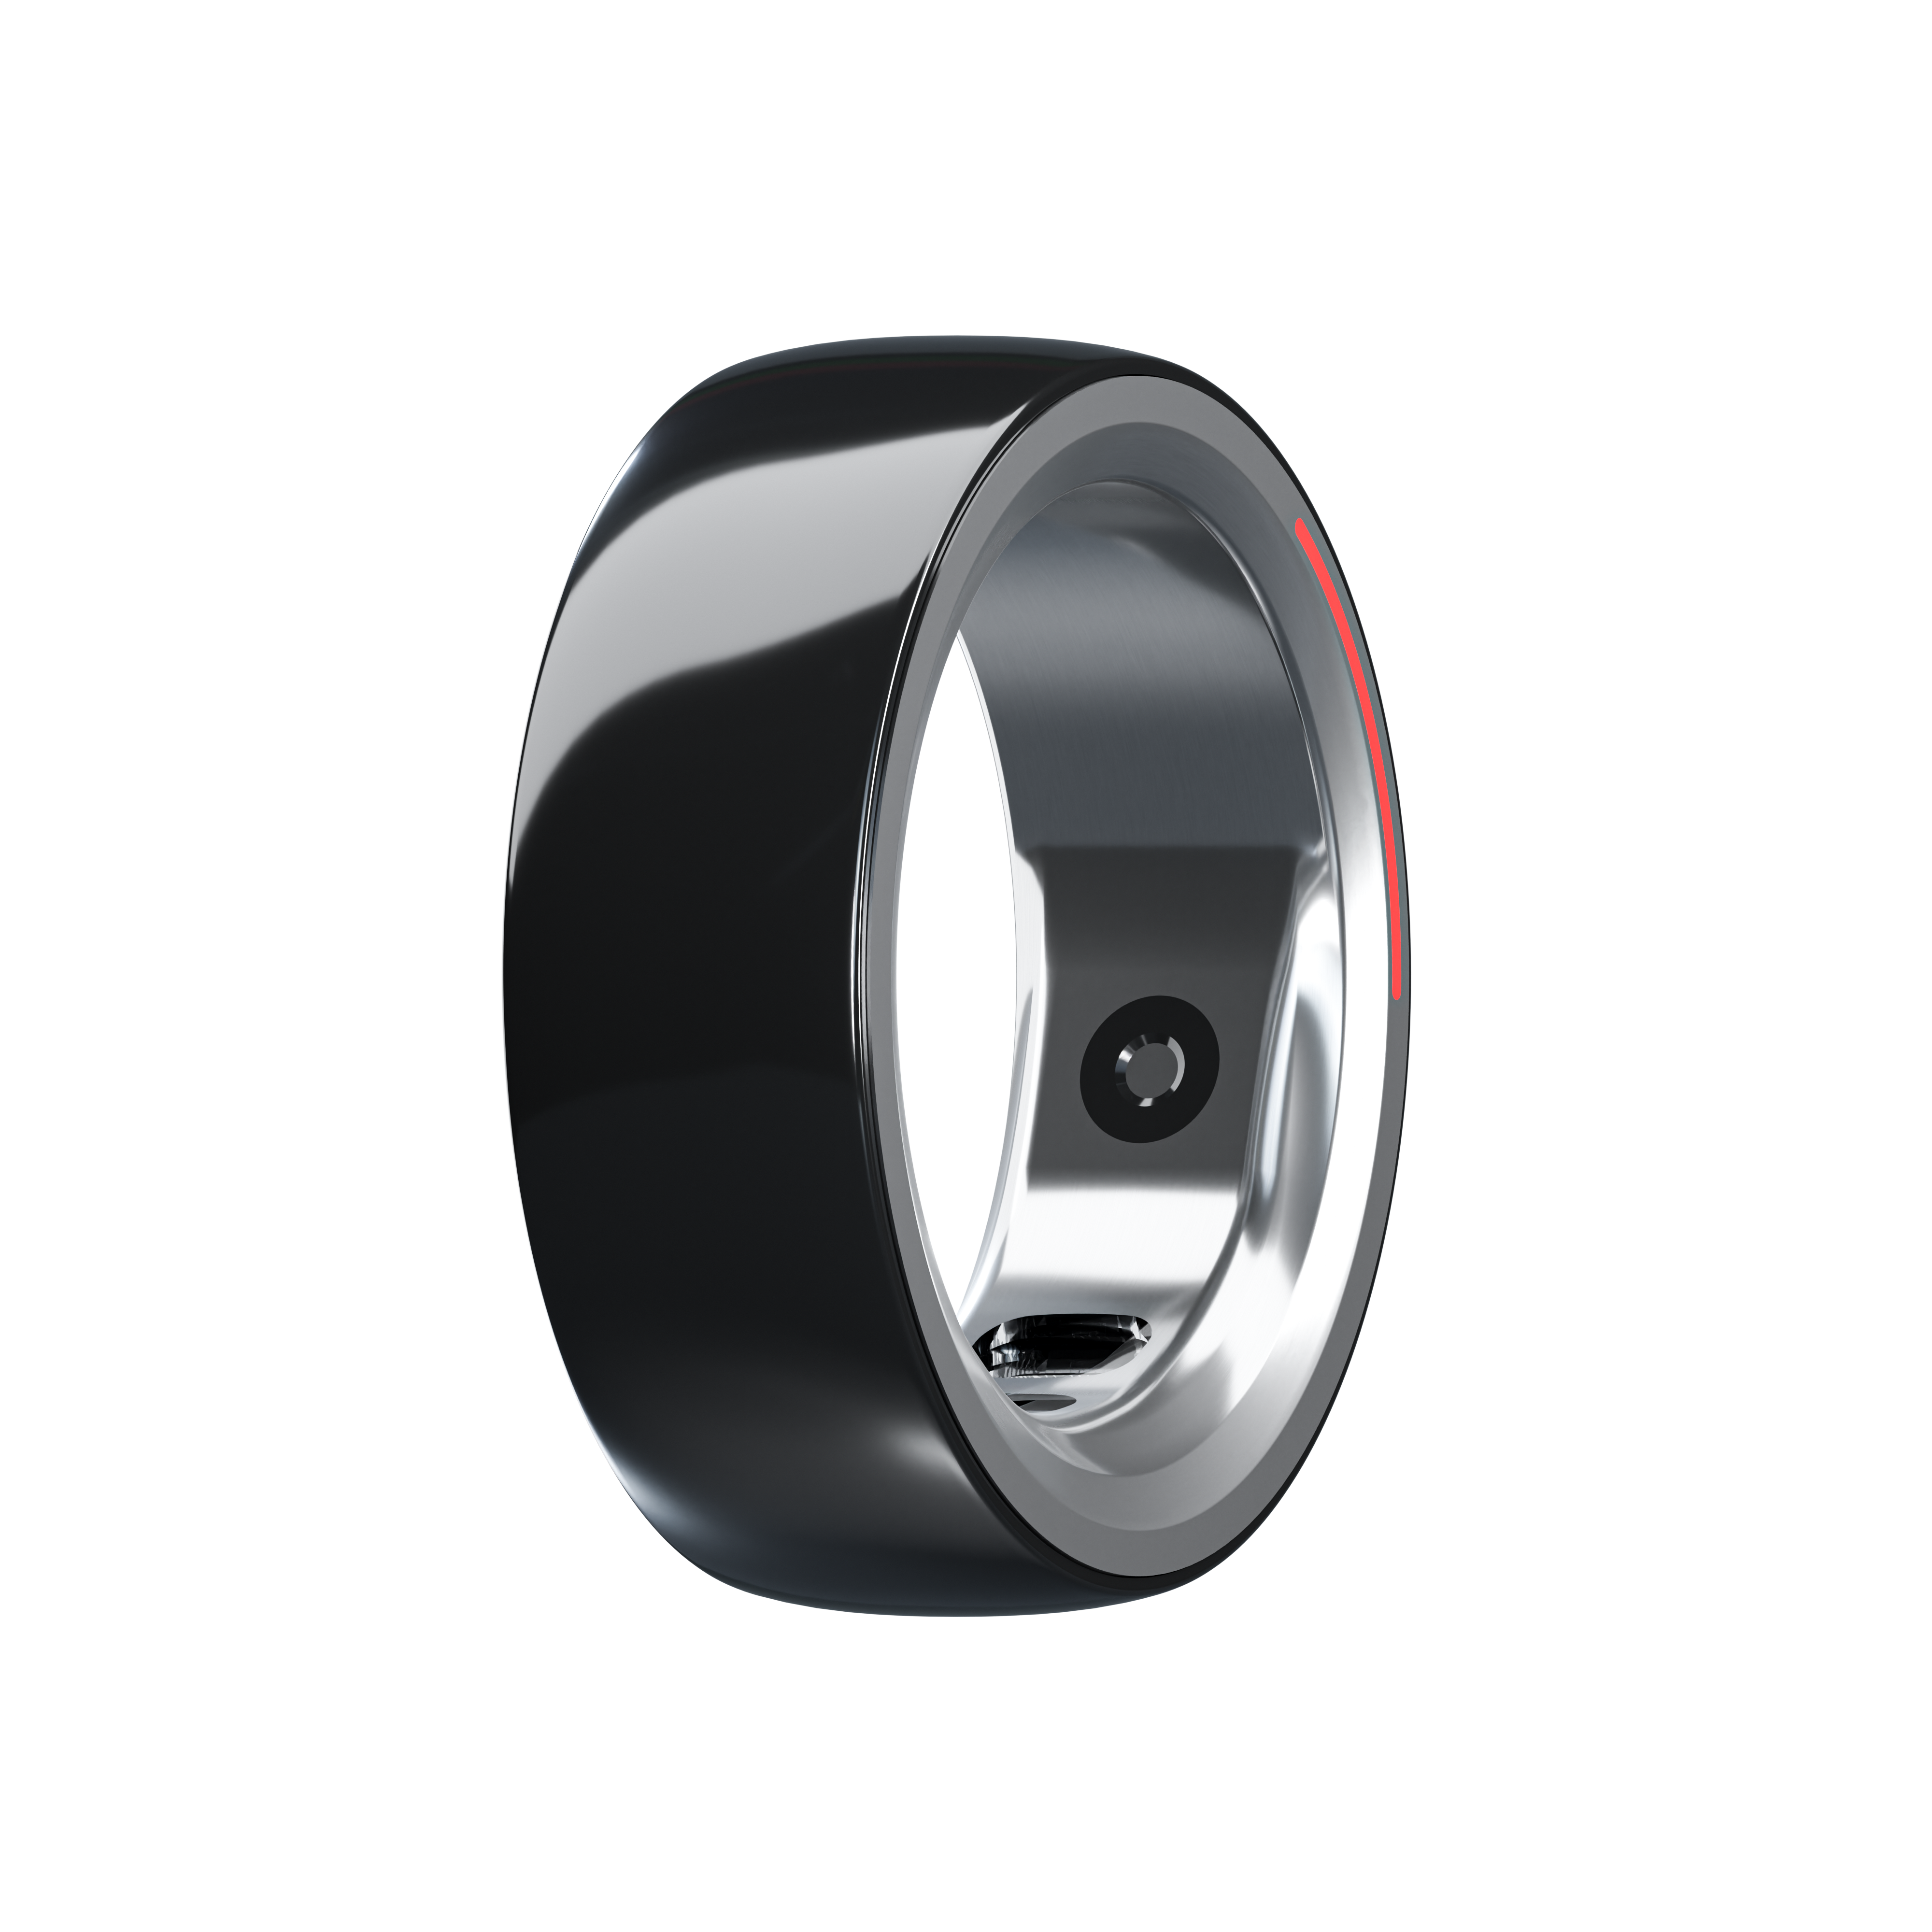 Halo Ring - 3rd Gen. Health, Entertainment & Sleep Tracking! – Pi Ring -  India's First Smart Ring for Fitness, Stress, Sleep & Health.